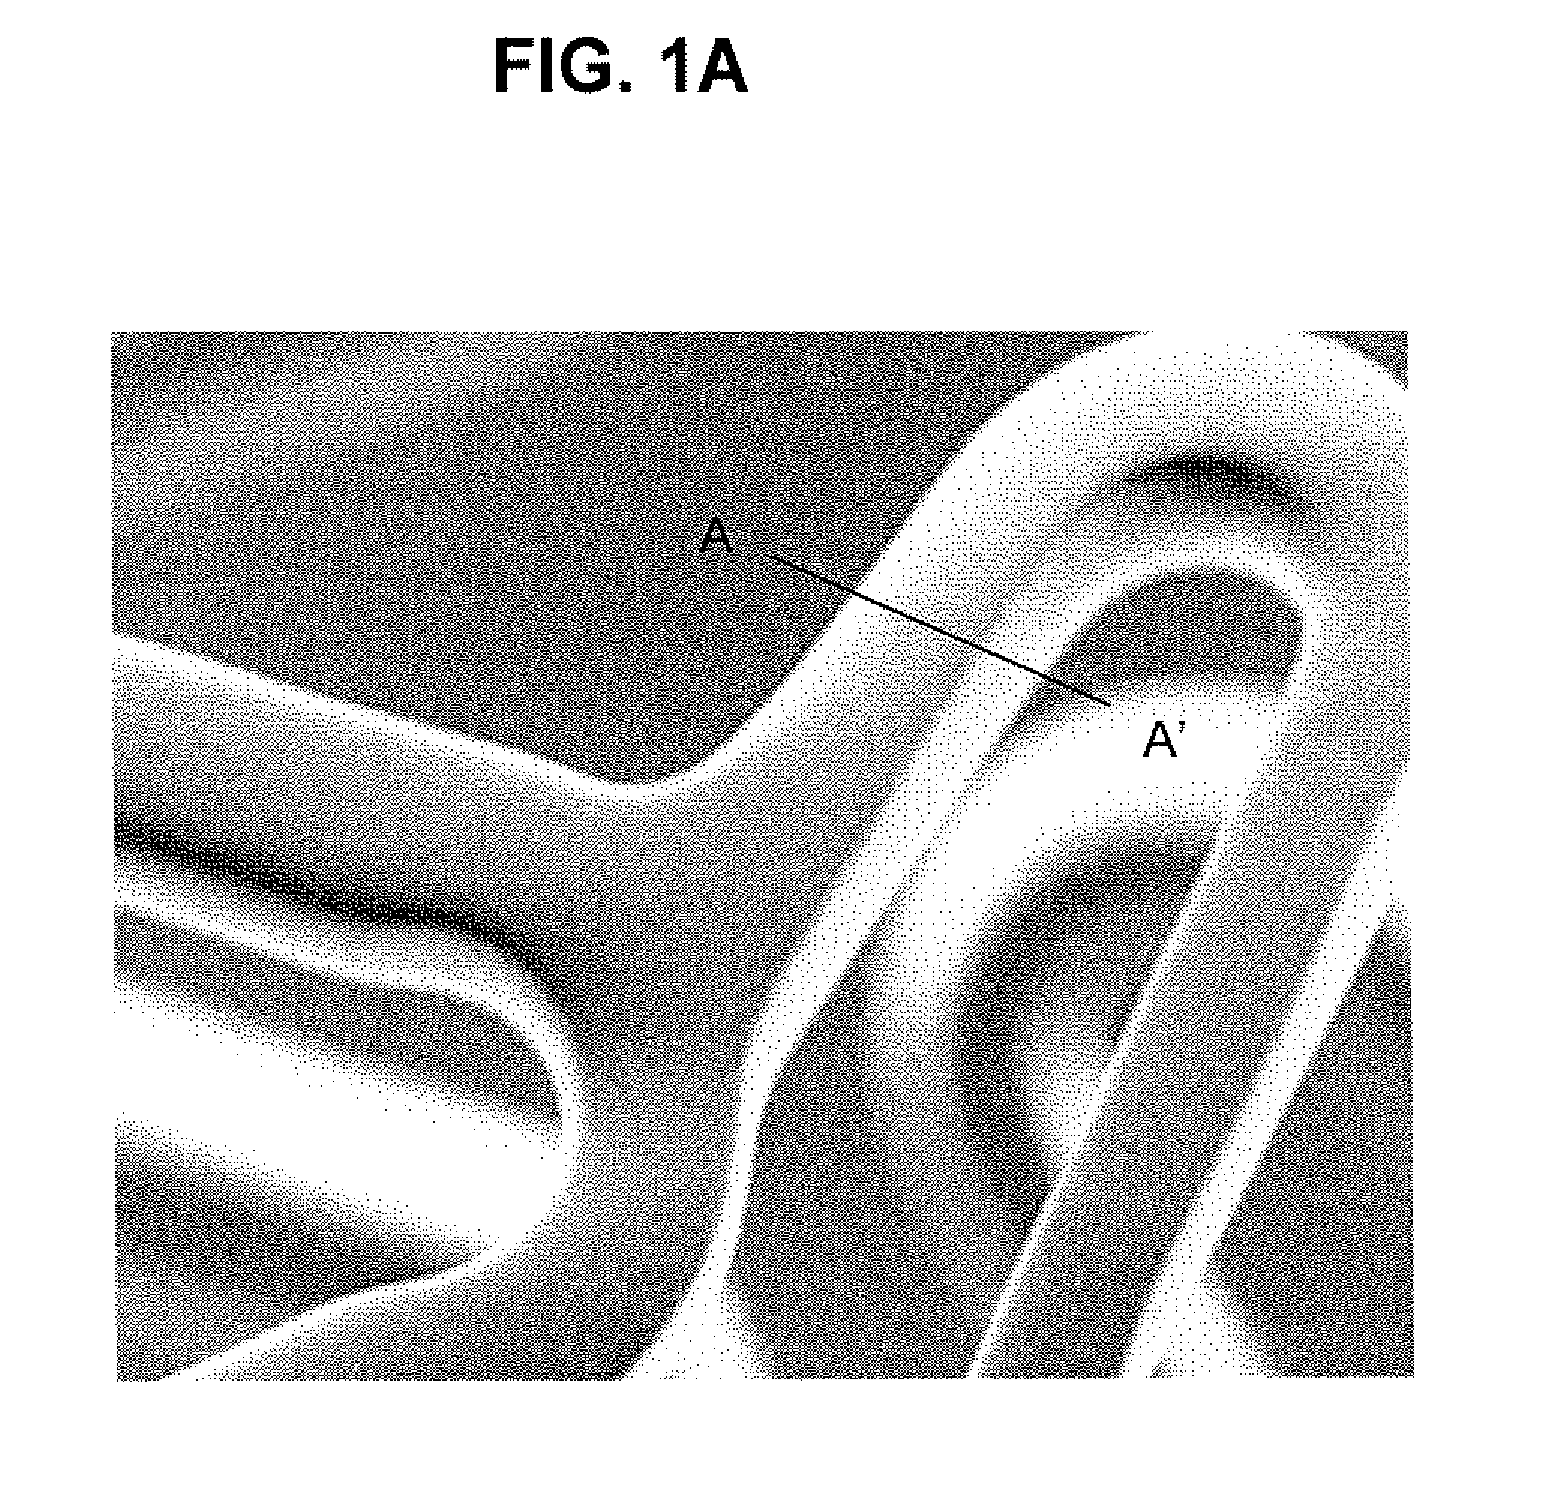 Vasodilator Eluting Luminal Stent Devices With A Specific Polyphosphazene Coating and Methods for Their Manufacture and Use